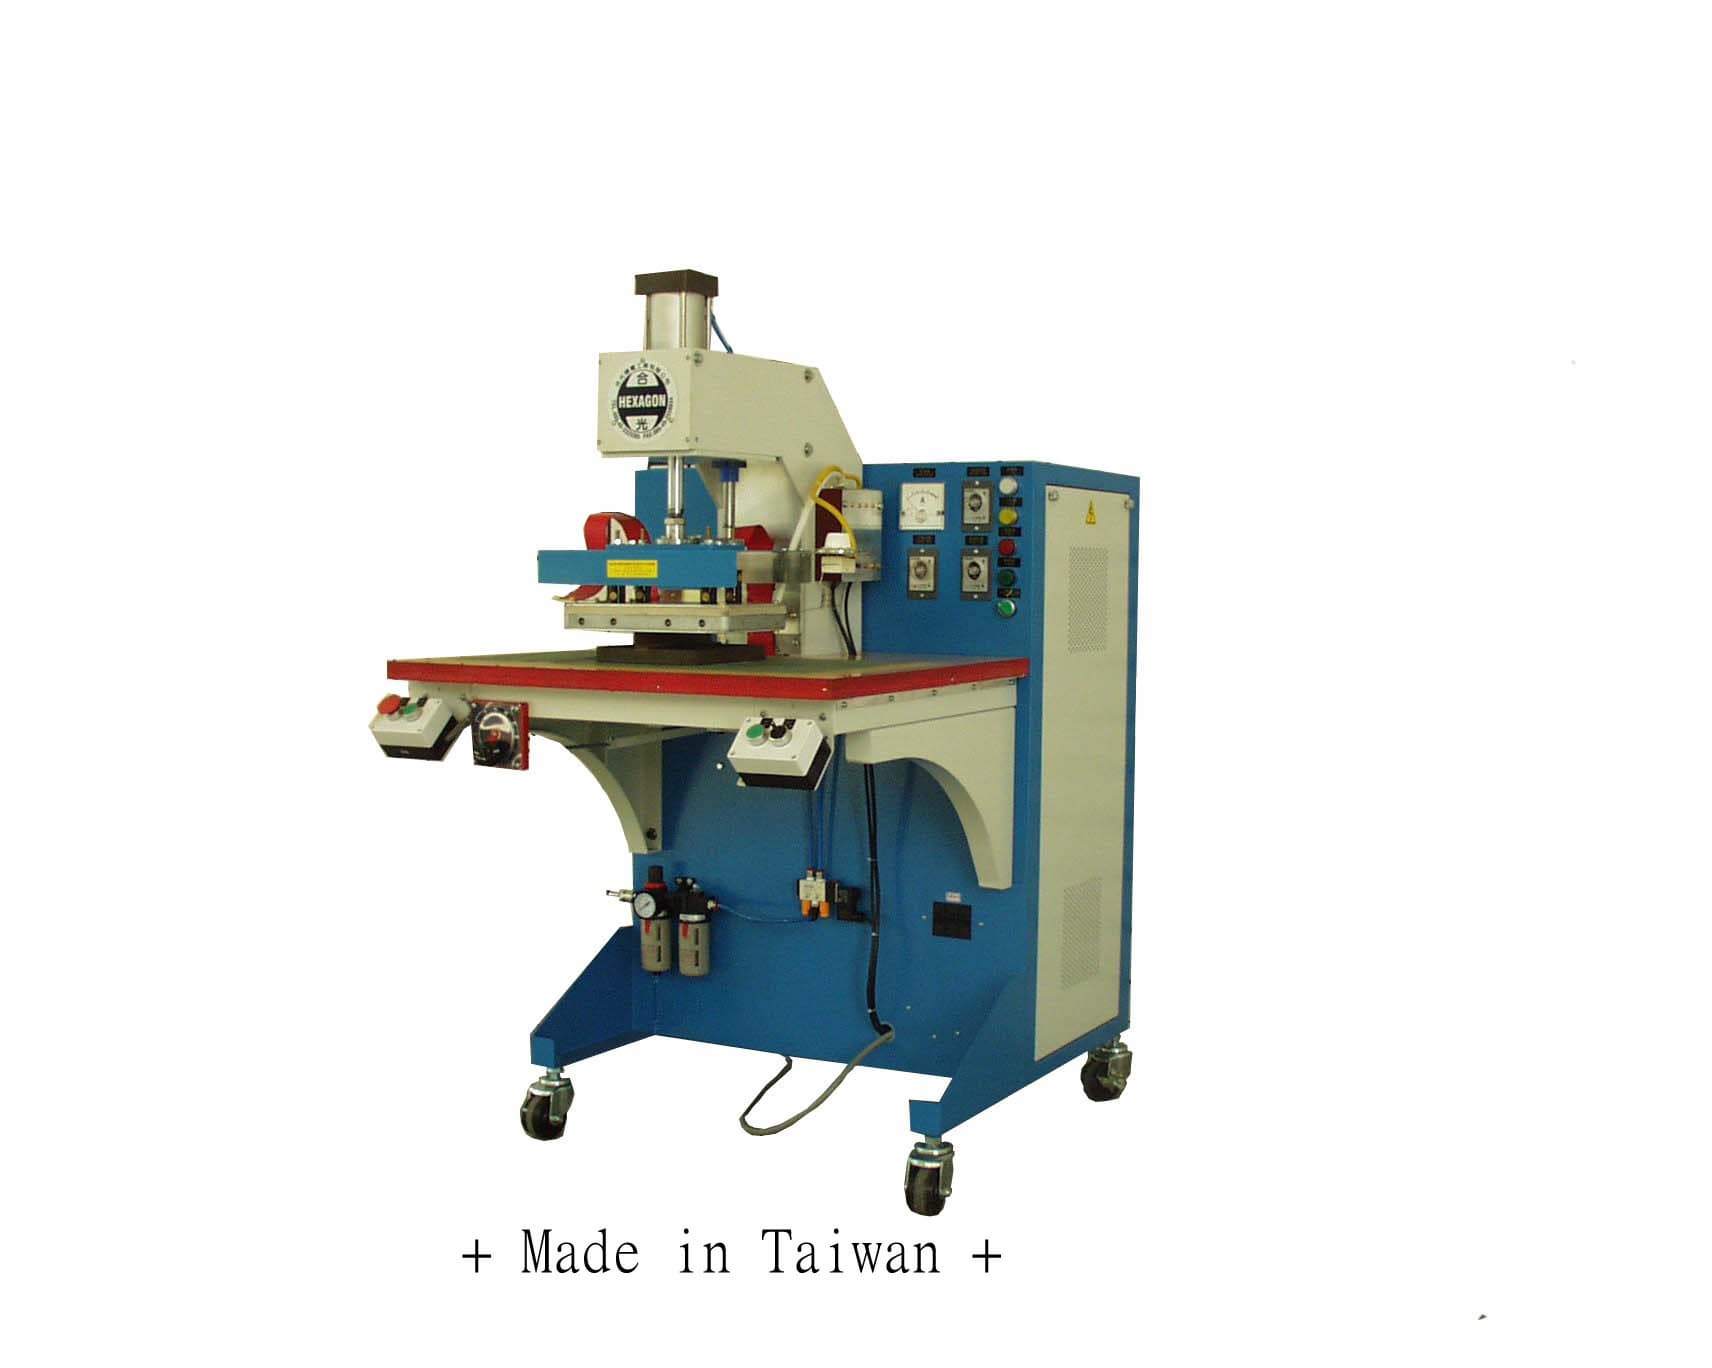 High Frequency PVC / PET-G Blister Packing Machine, High Frequency Welder, HF Welder